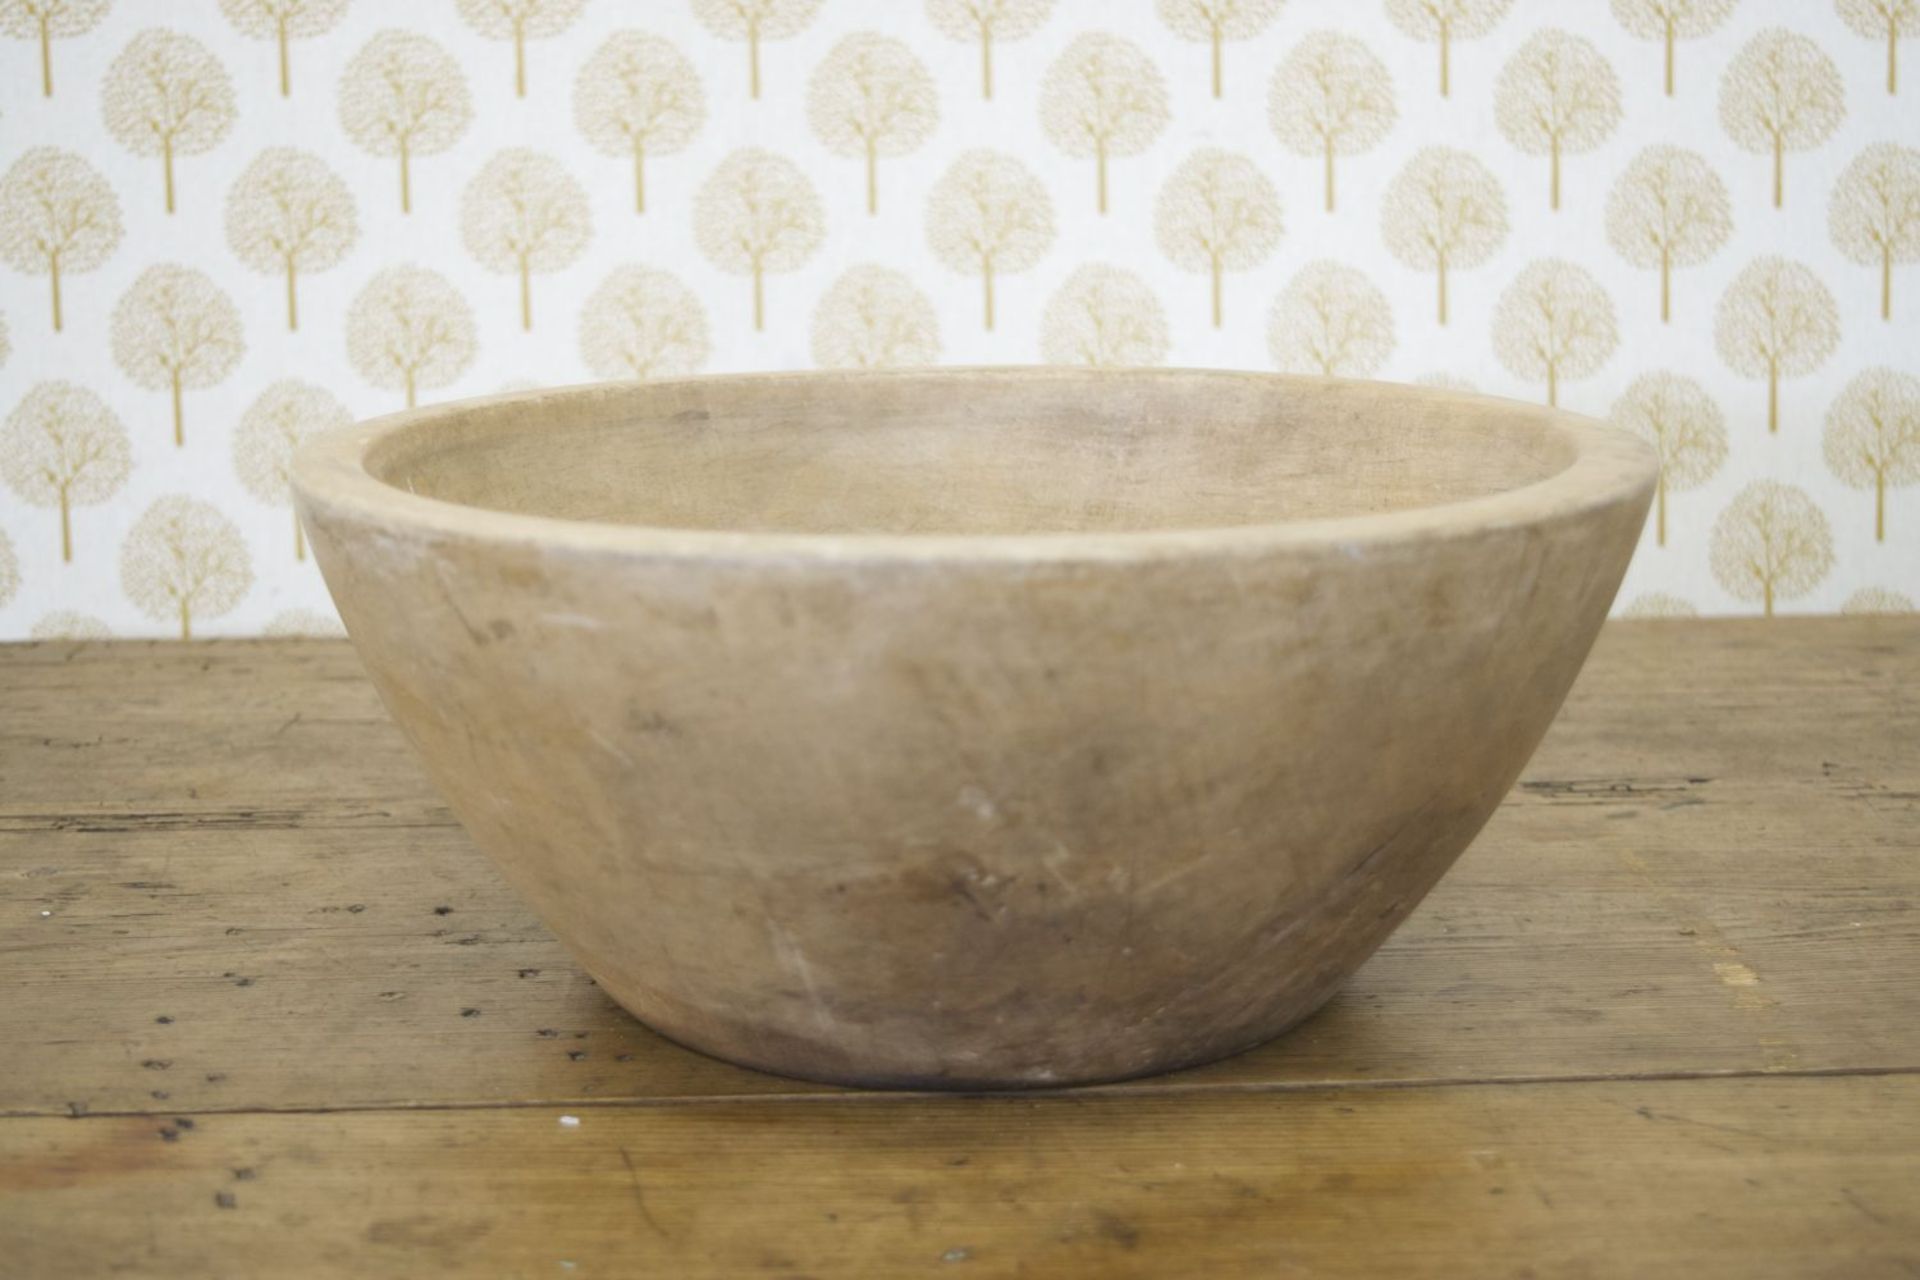 19TH-CENTURY SYCAMORE TREEN BUTTER BOWL